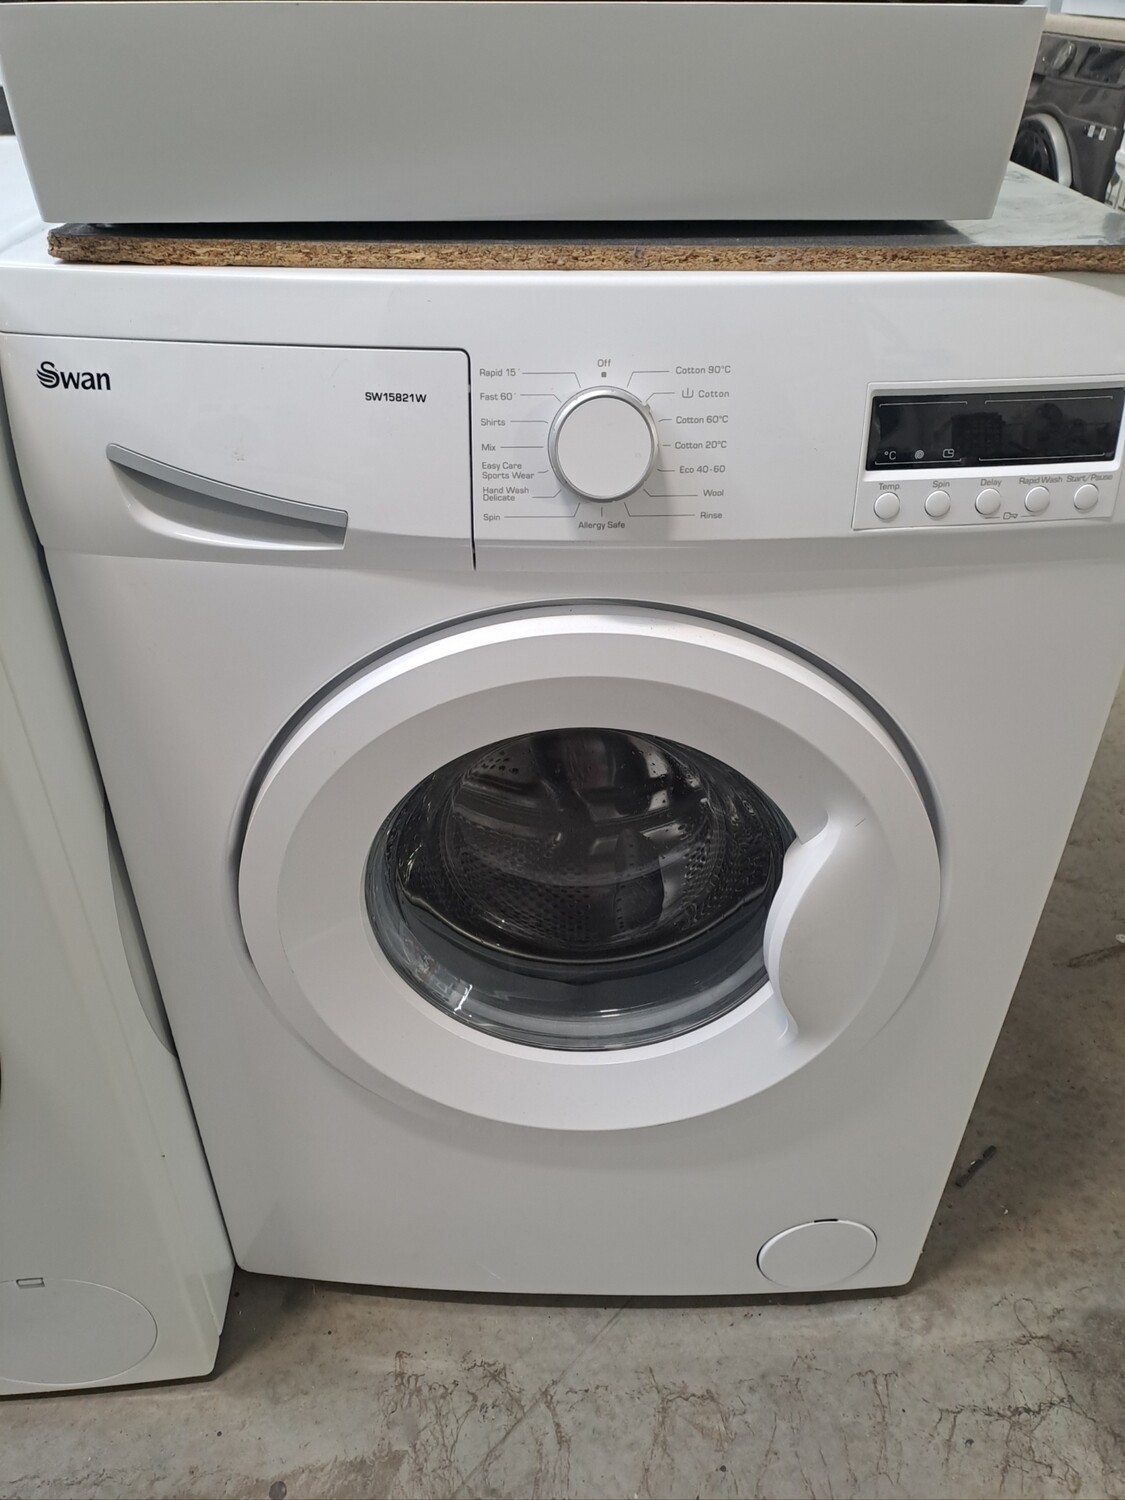 Swan SW15831W 8kg Load, 1200 Spin Washing Machine - White - Refurbished + 6 Month Guarantee. This item is located at our Whitby Road Shop